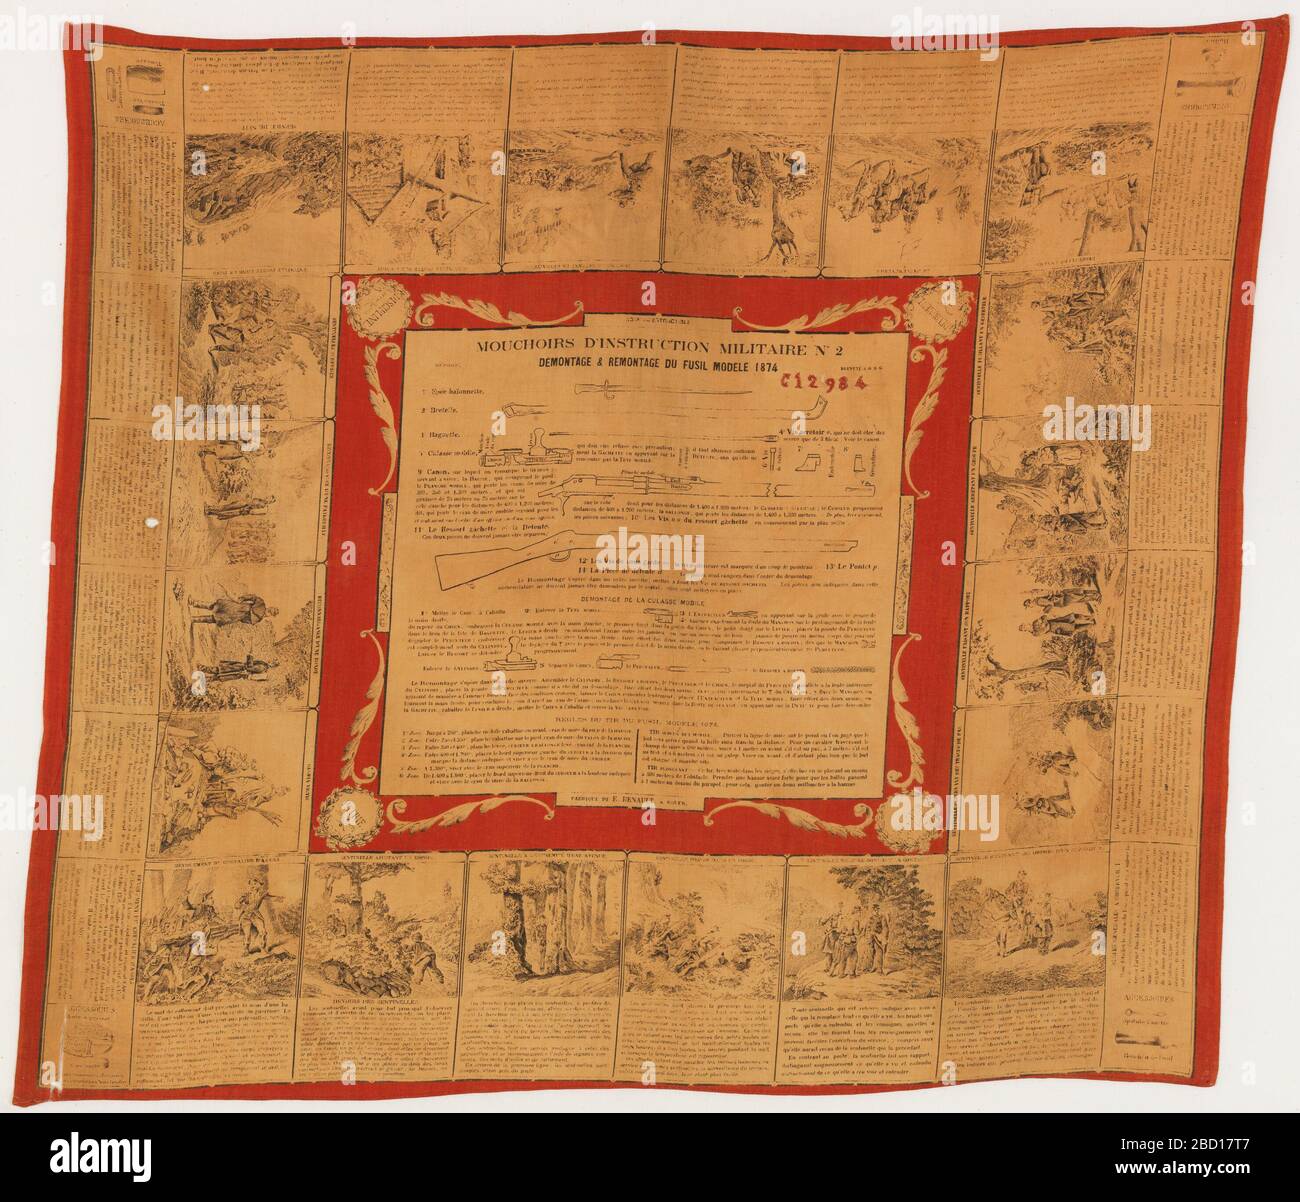 Muchoirs Dinstruction Militaire. Research in ProgressRed cotton handkerchief printed with black design on cream ground showing military activities. At center are instructions on instruction on the stripping and assembly of the 1886M93 Lebel rifle. Muchoirs Dinstruction Militaire Stock Photo